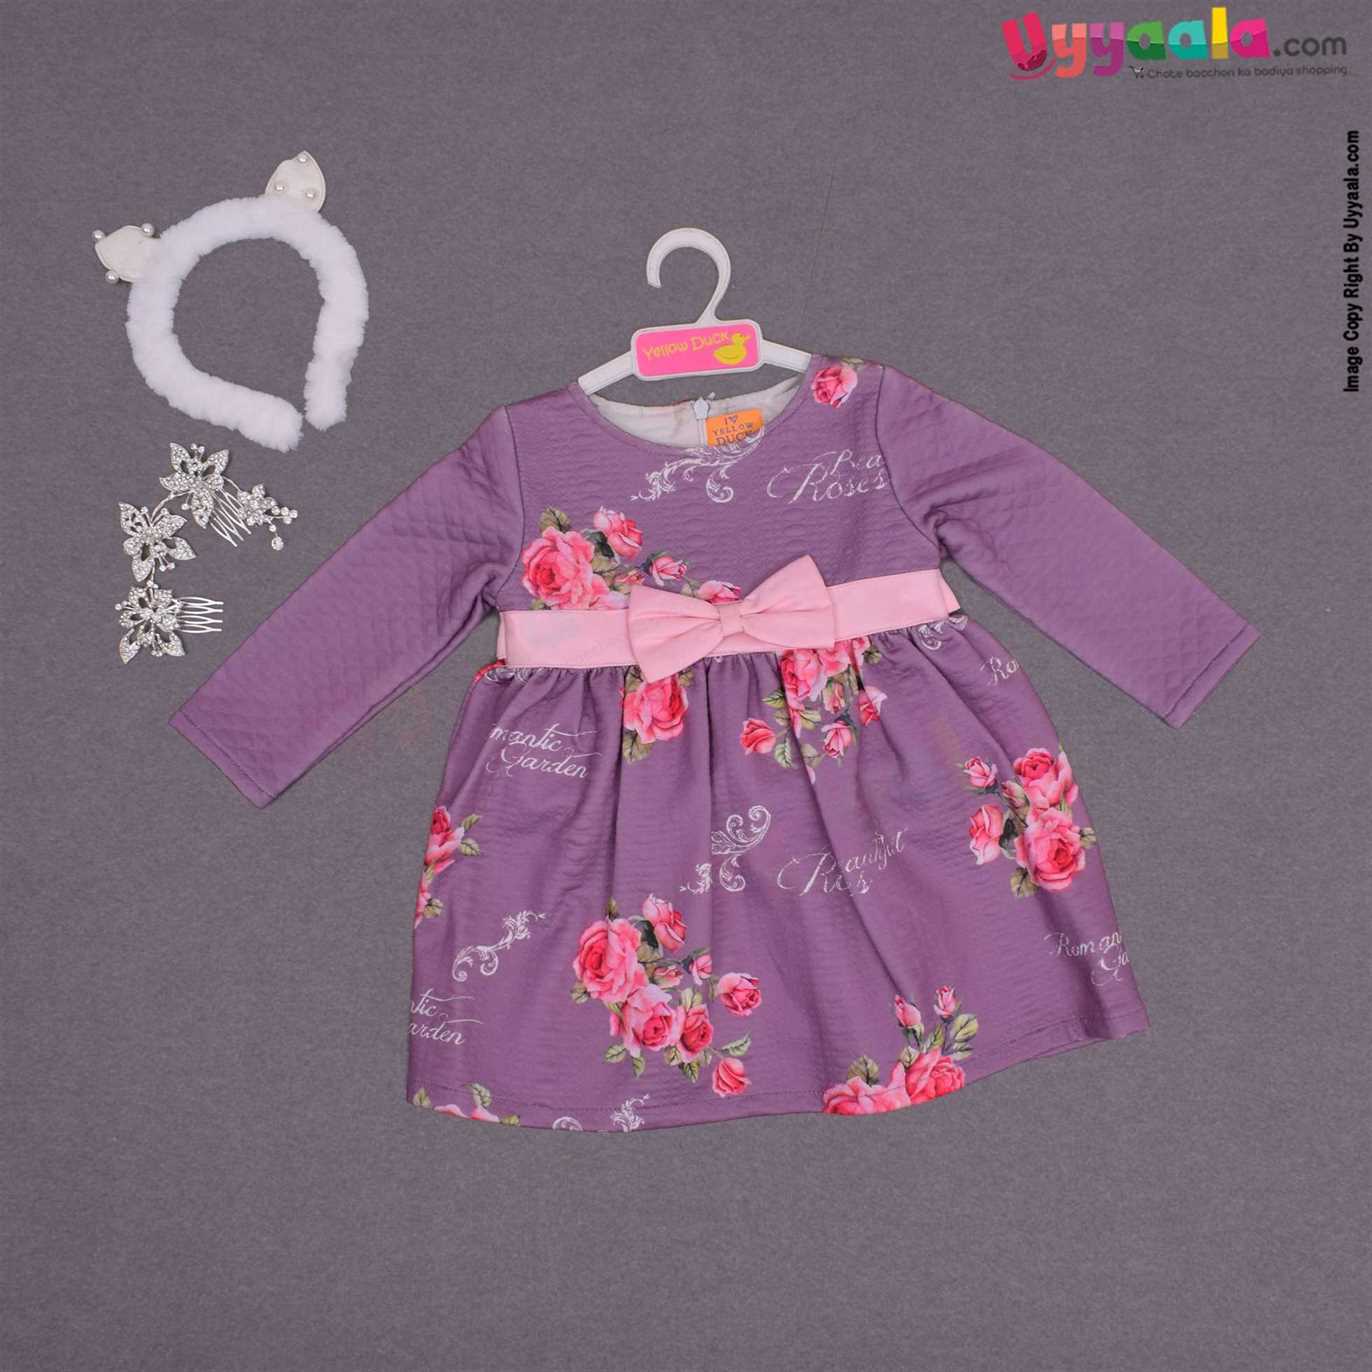 YELLOW DUCK Cotton full sleeve party wear frock for baby girl,back open zip model with bow applique